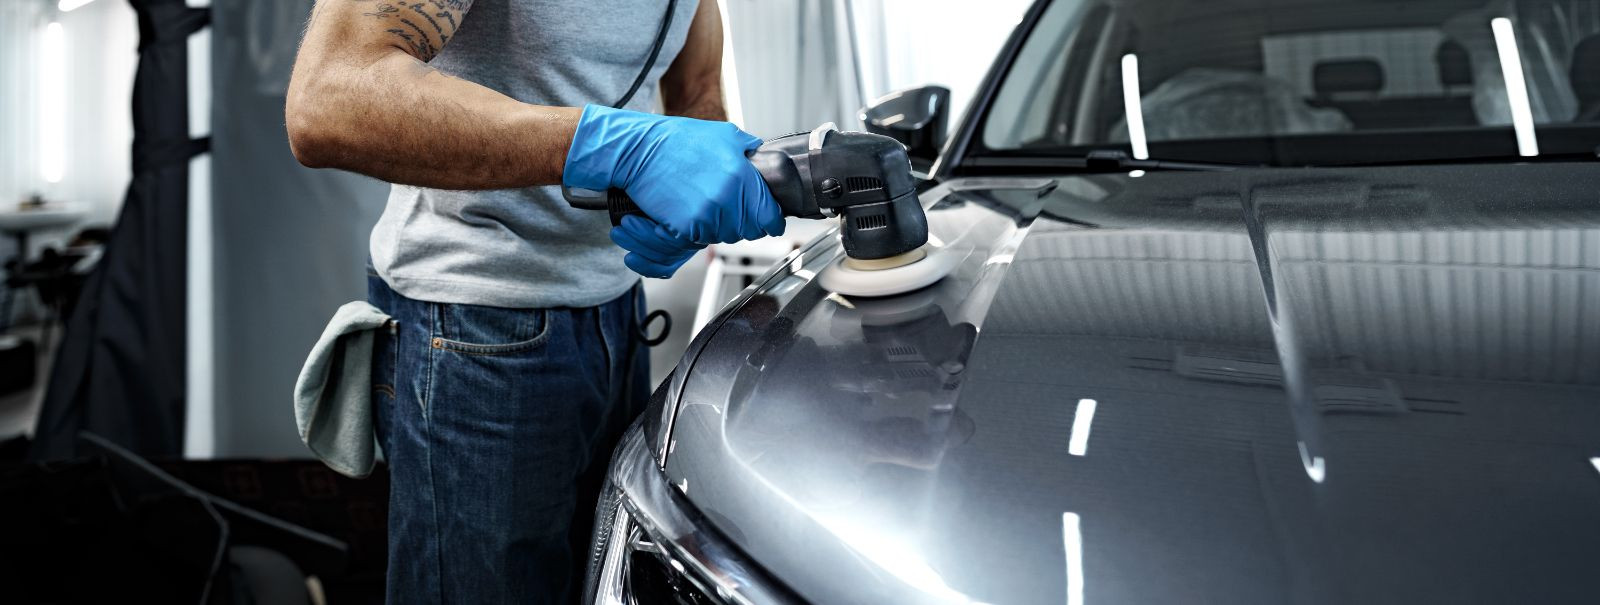 Car detailing is more than just a wash; it's a comprehensive cleaning and preservation process that keeps your vehicle looking its best and protects your invest